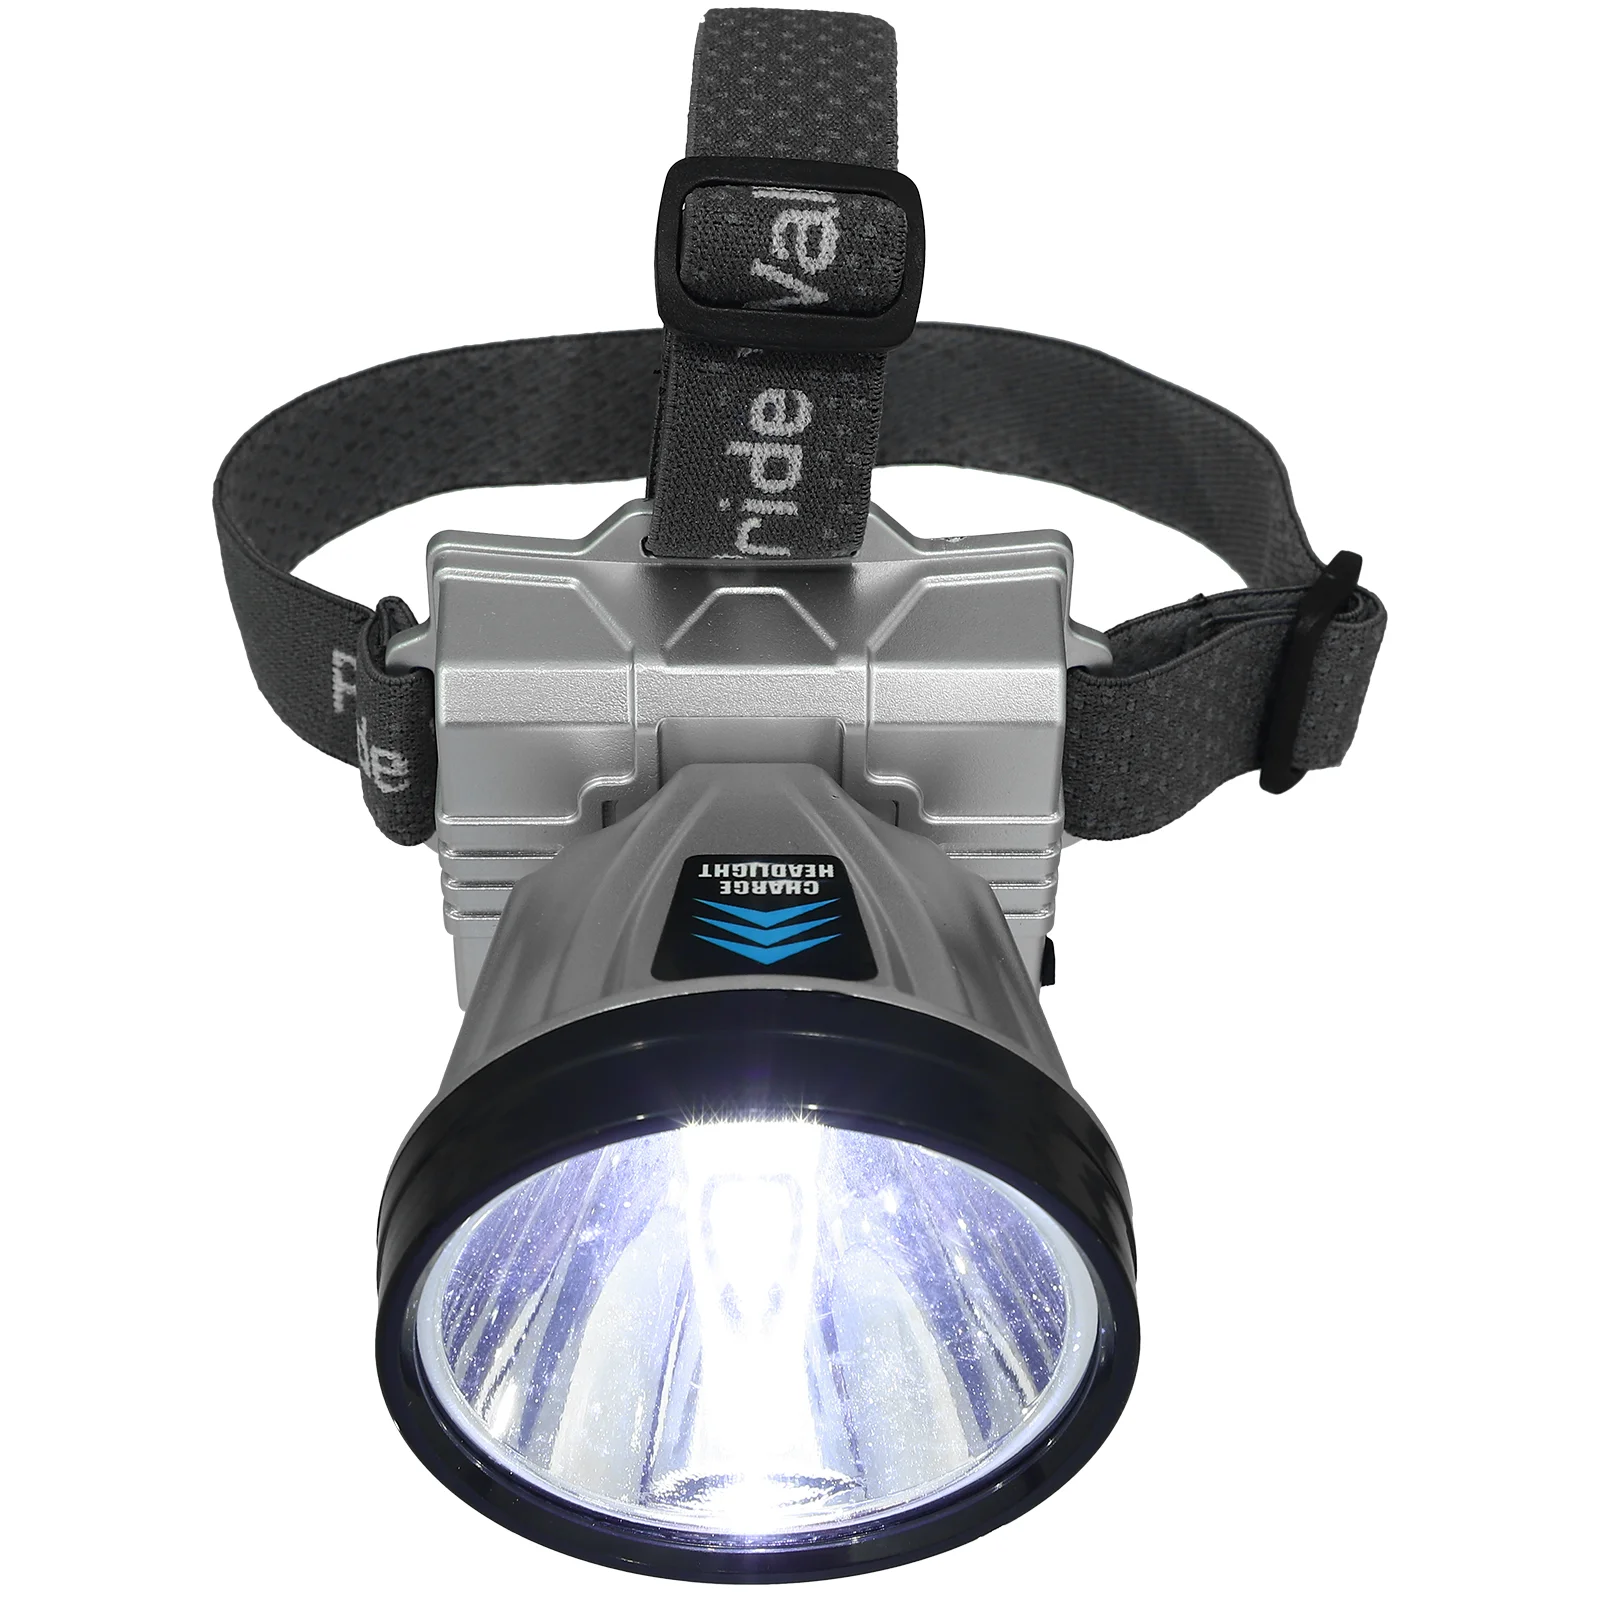 

Led Headlamp High Brightness Light Rechargeable Headlight for Camping Fishing Repairing